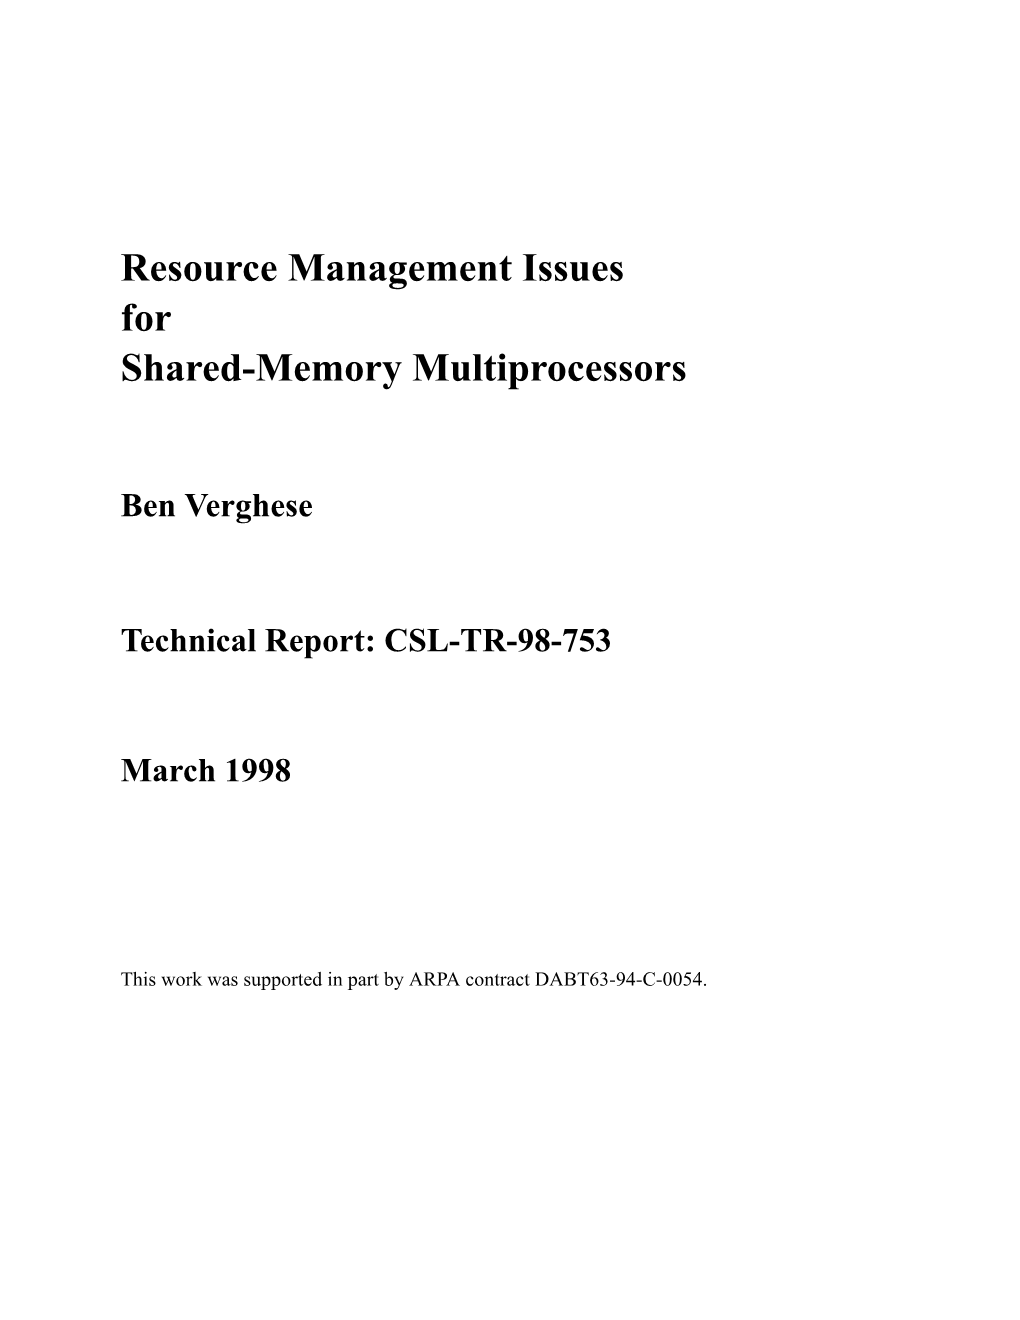 Resource Management Issues for Shared-Memory Multiprocessors